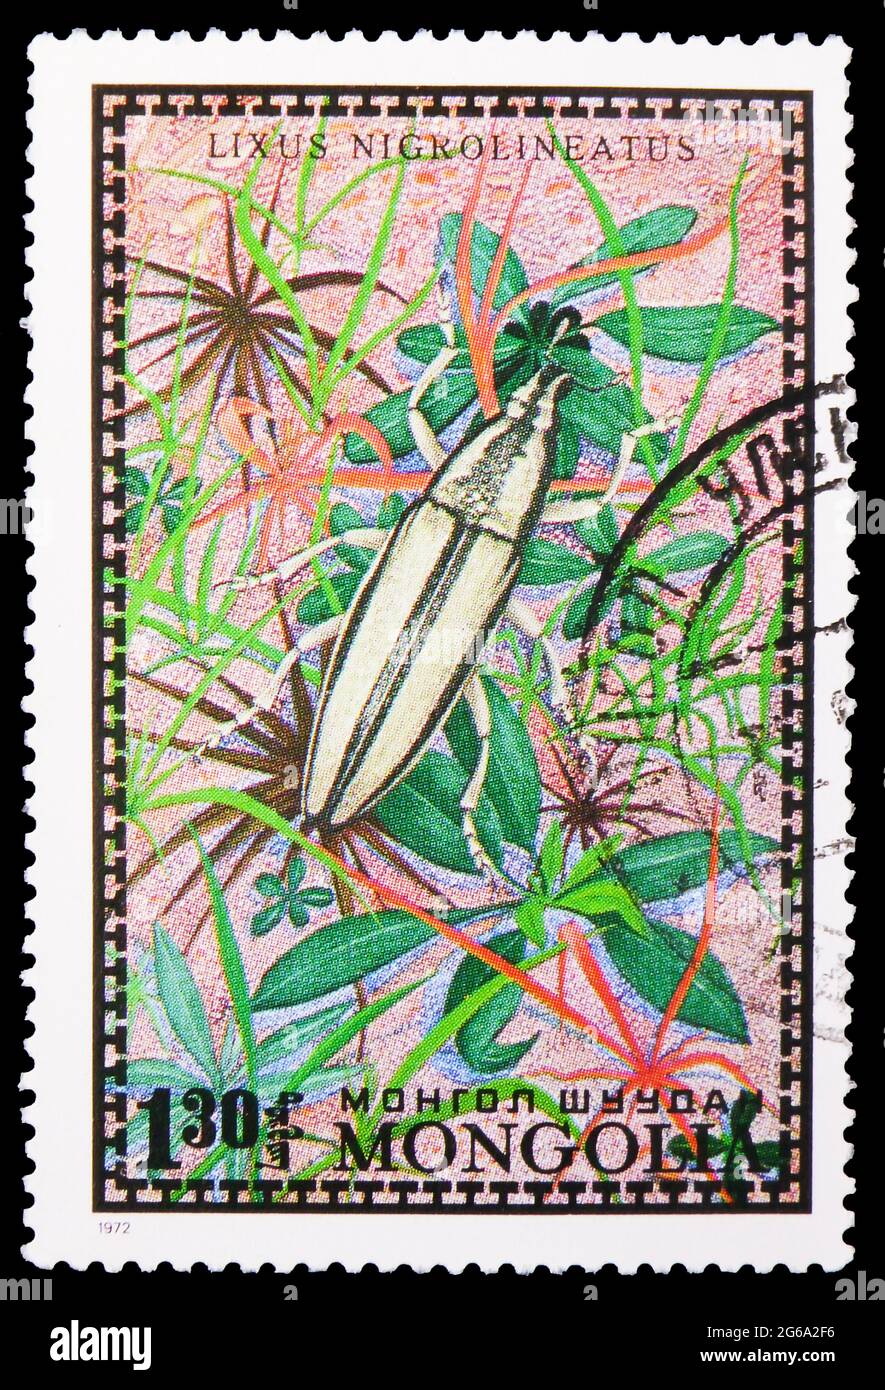 MOSCOW, RUSSIA - APRIL 18, 2020: Postage stamp printed in Mongolia shows Larder Beetle (Lixus nigrolineatus), Bugs serie, circa 1972 Stock Photo